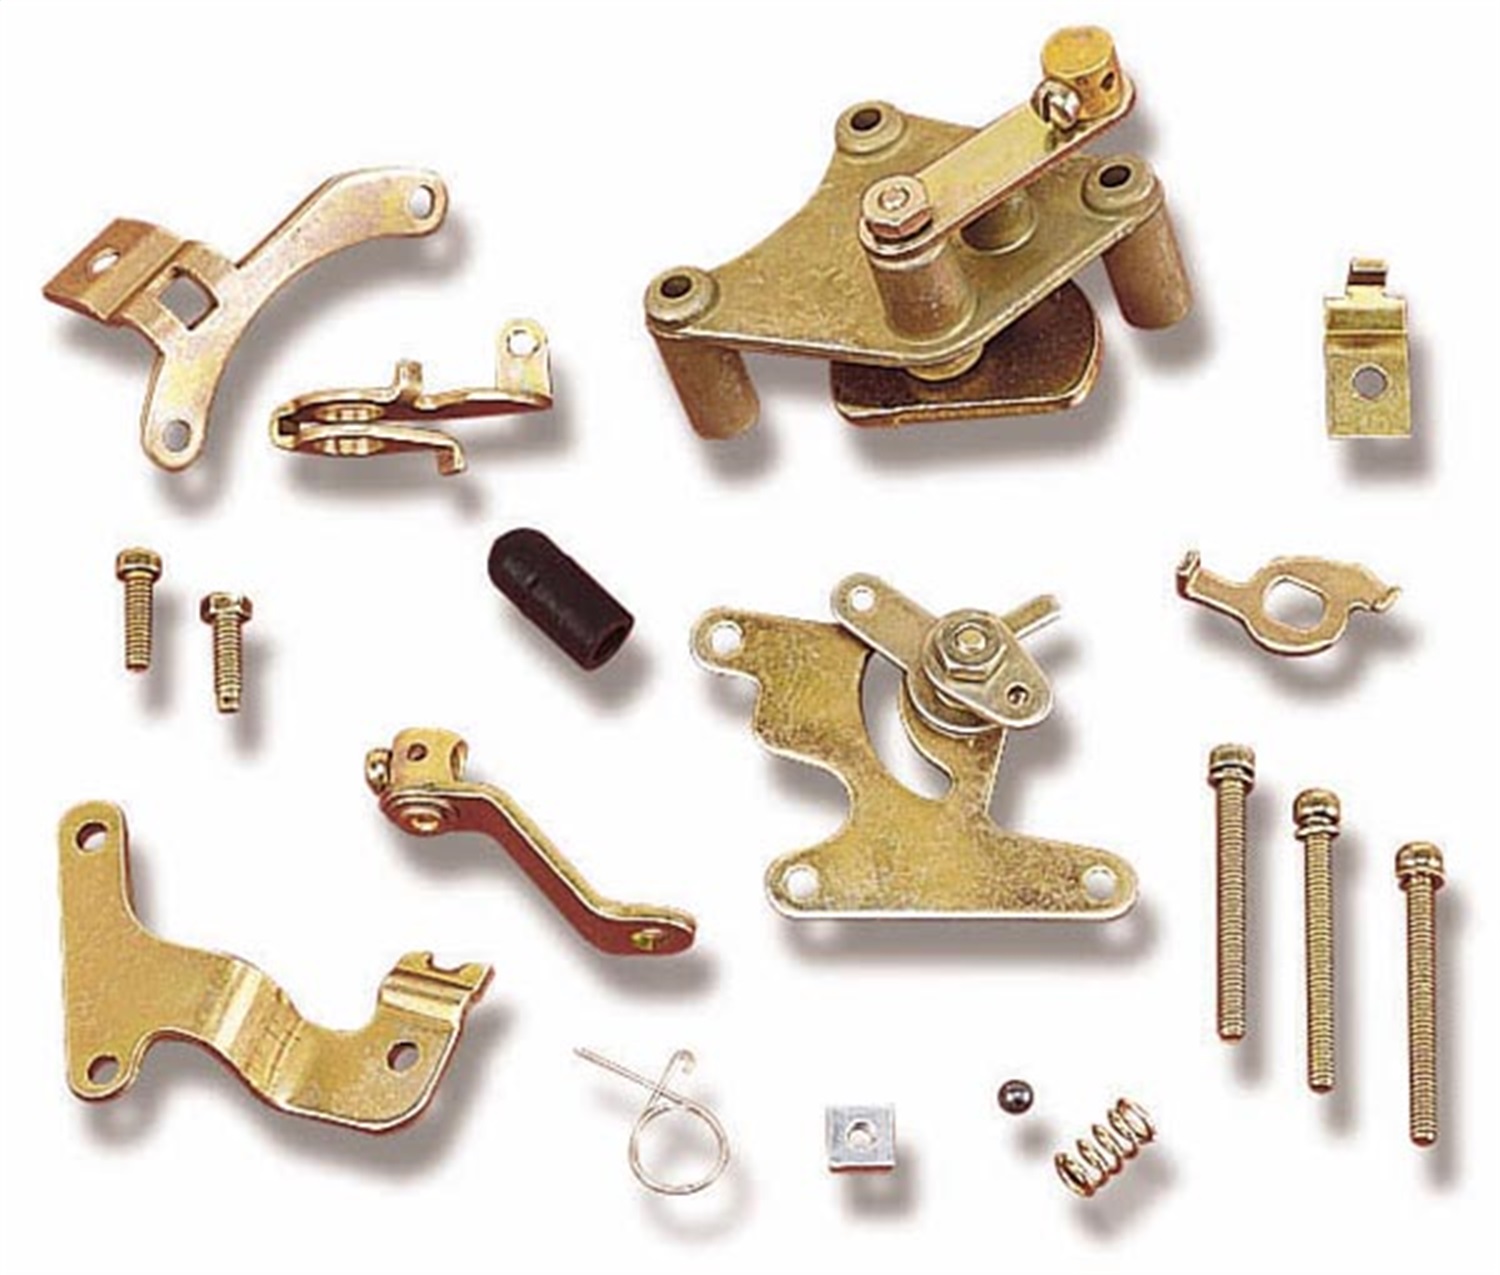 Holley Performance Holley Performance 45-225 Choke Conversion Kit